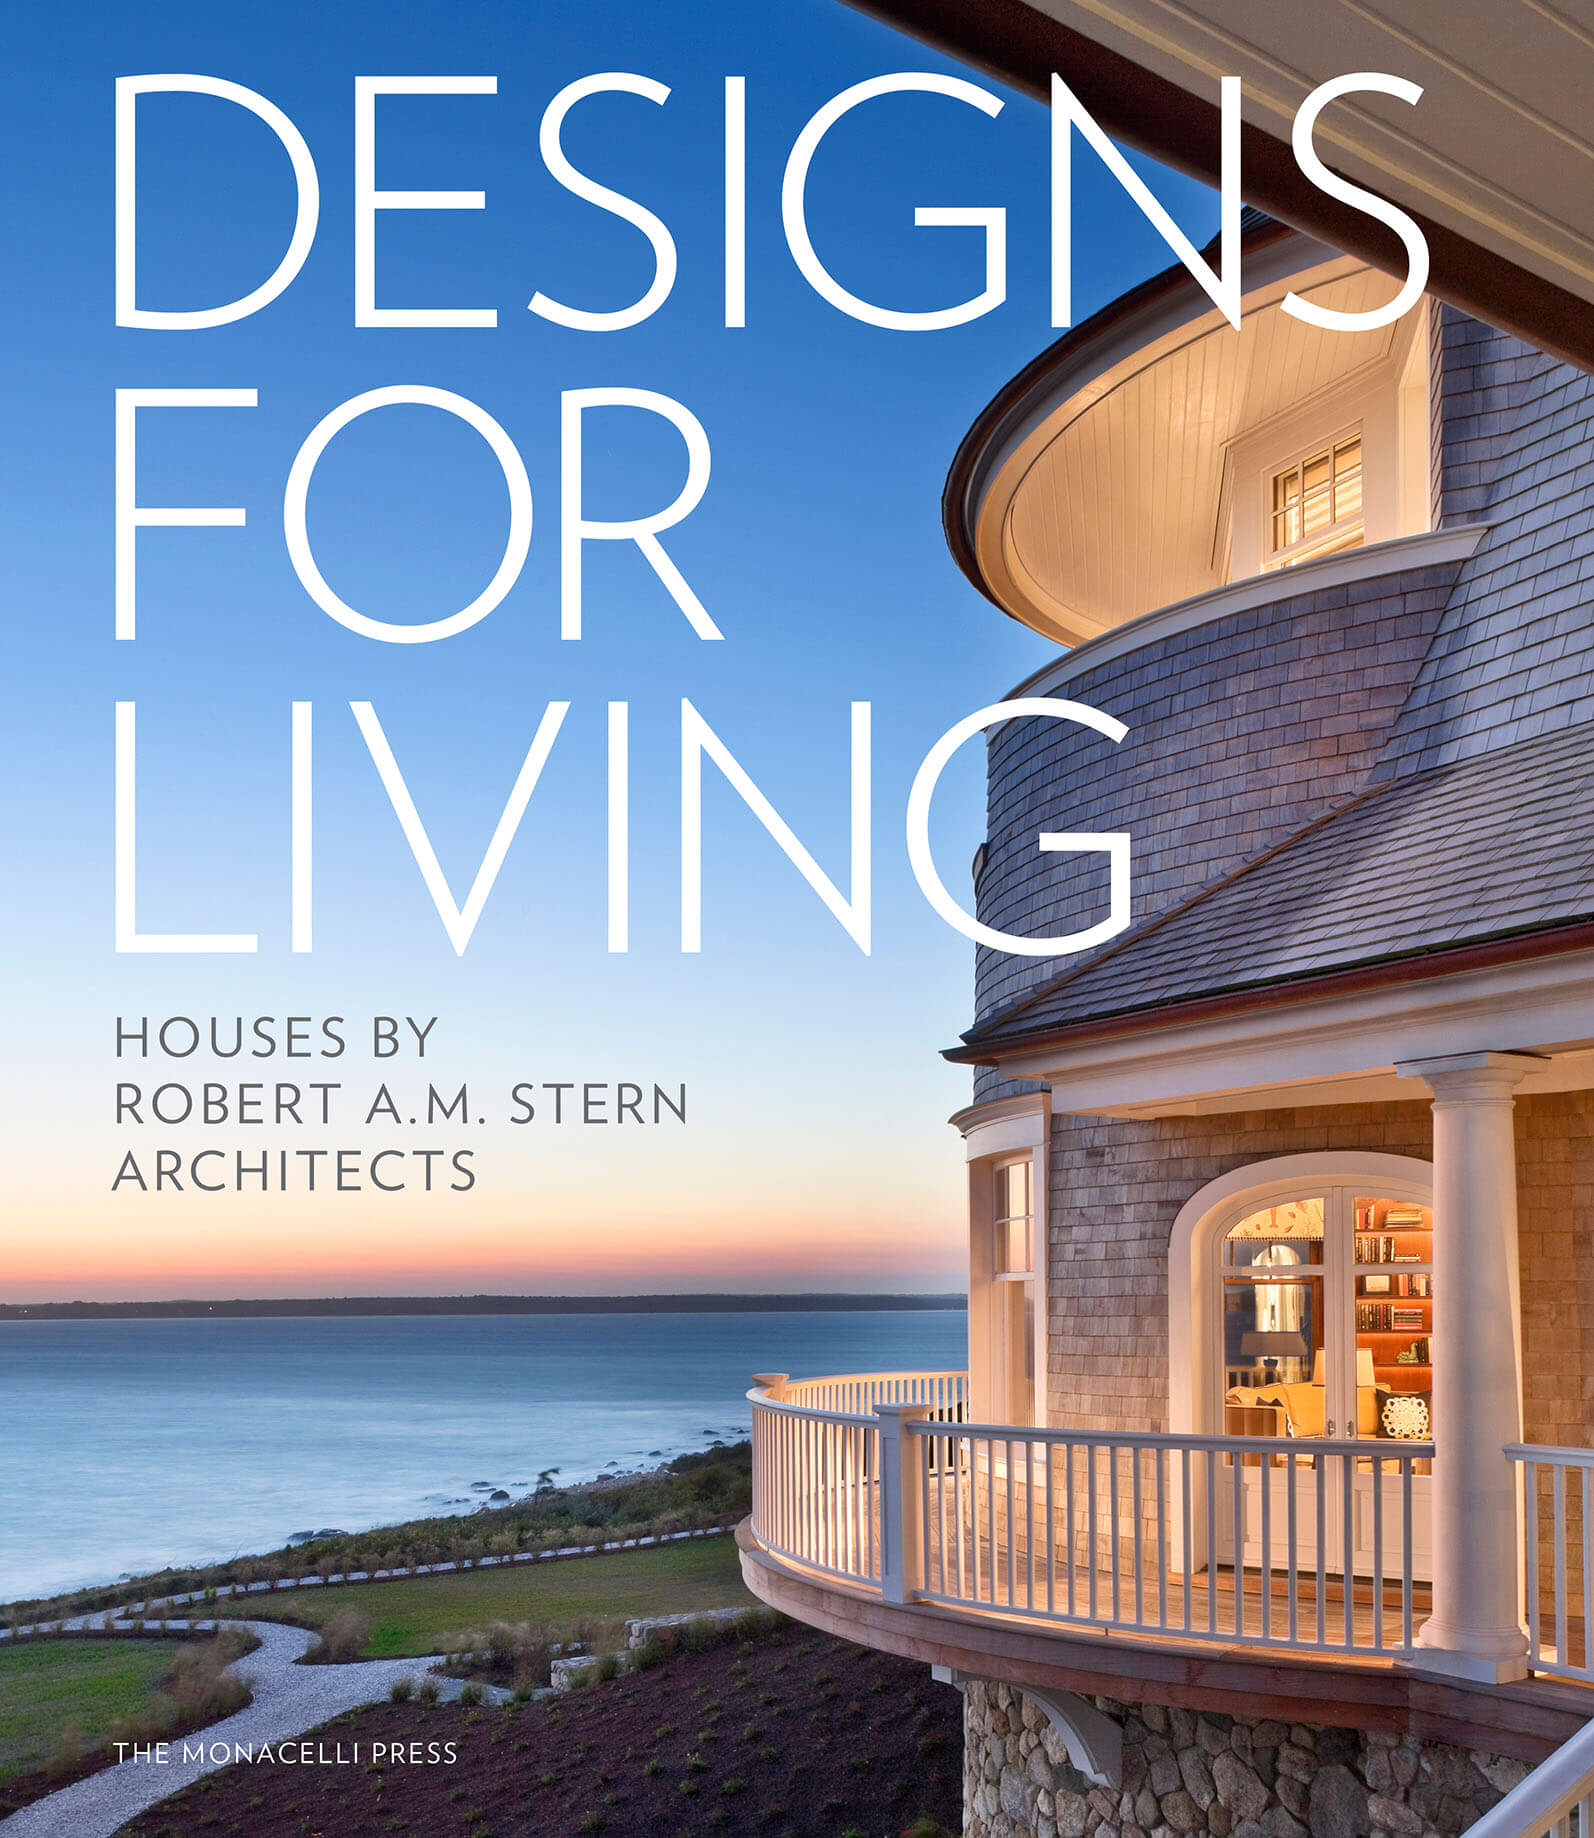 Designs for Living: Houses by Robert A.M. Stern Architects